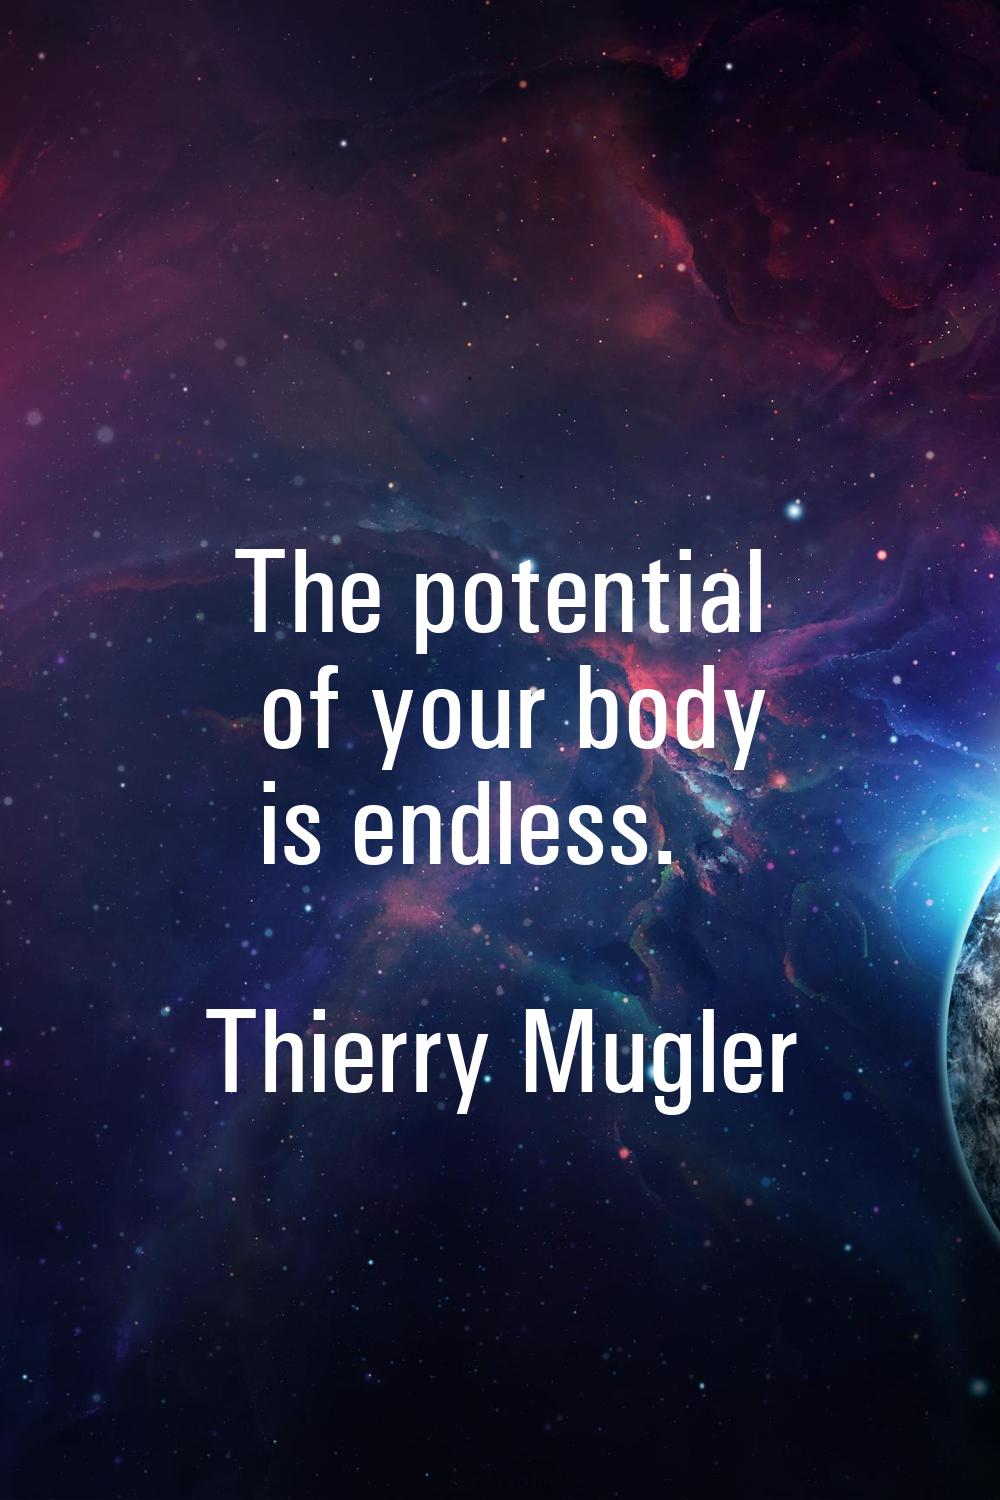 The potential of your body is endless.